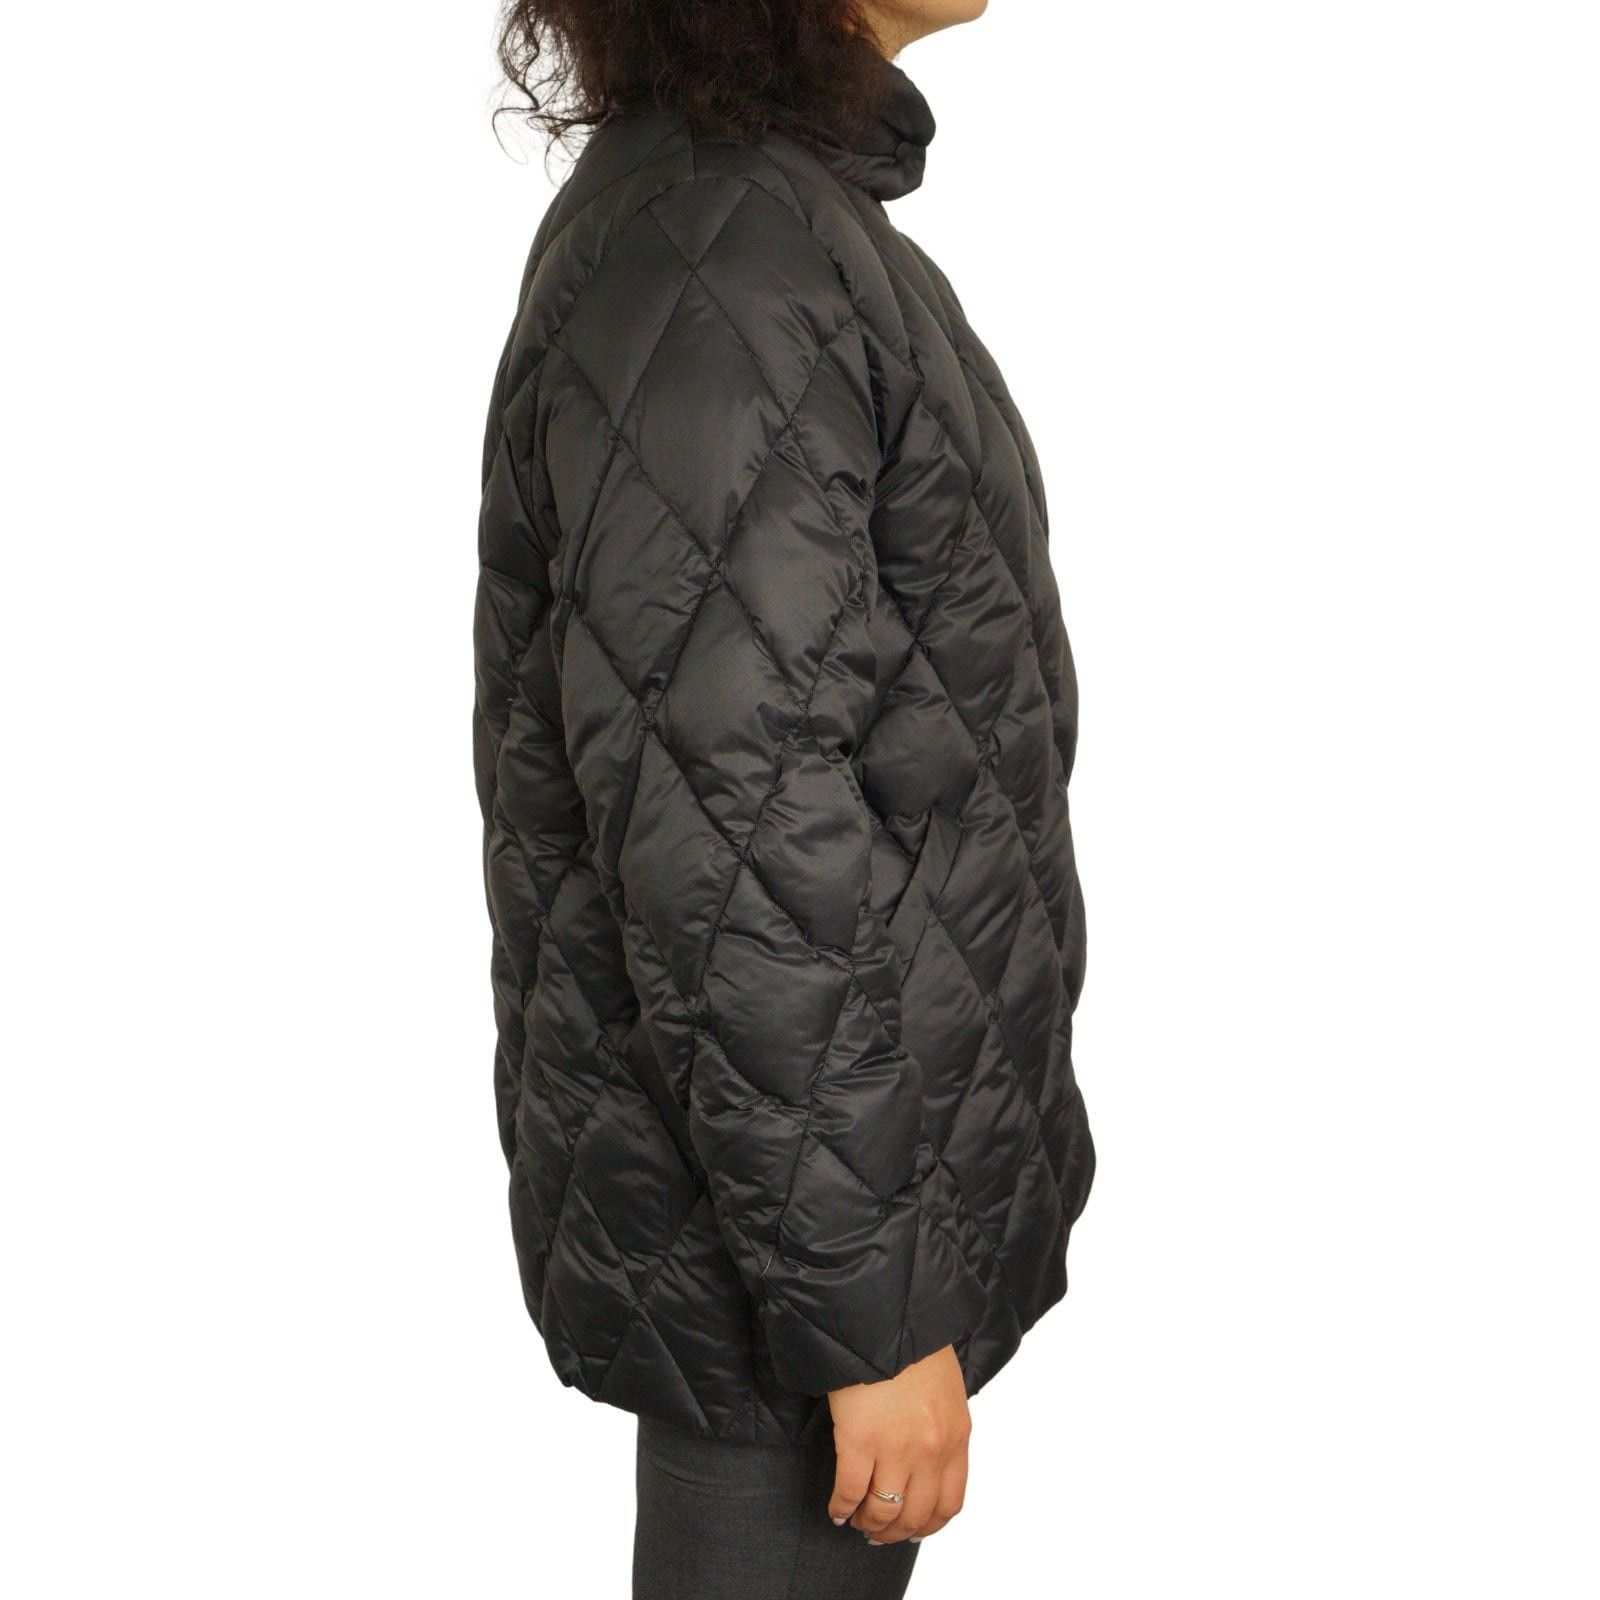 Moncler Woman Moncler Quilted Jacket Down Black Size M Size M / US 6-8 / IT 42-44 - 2 Preview